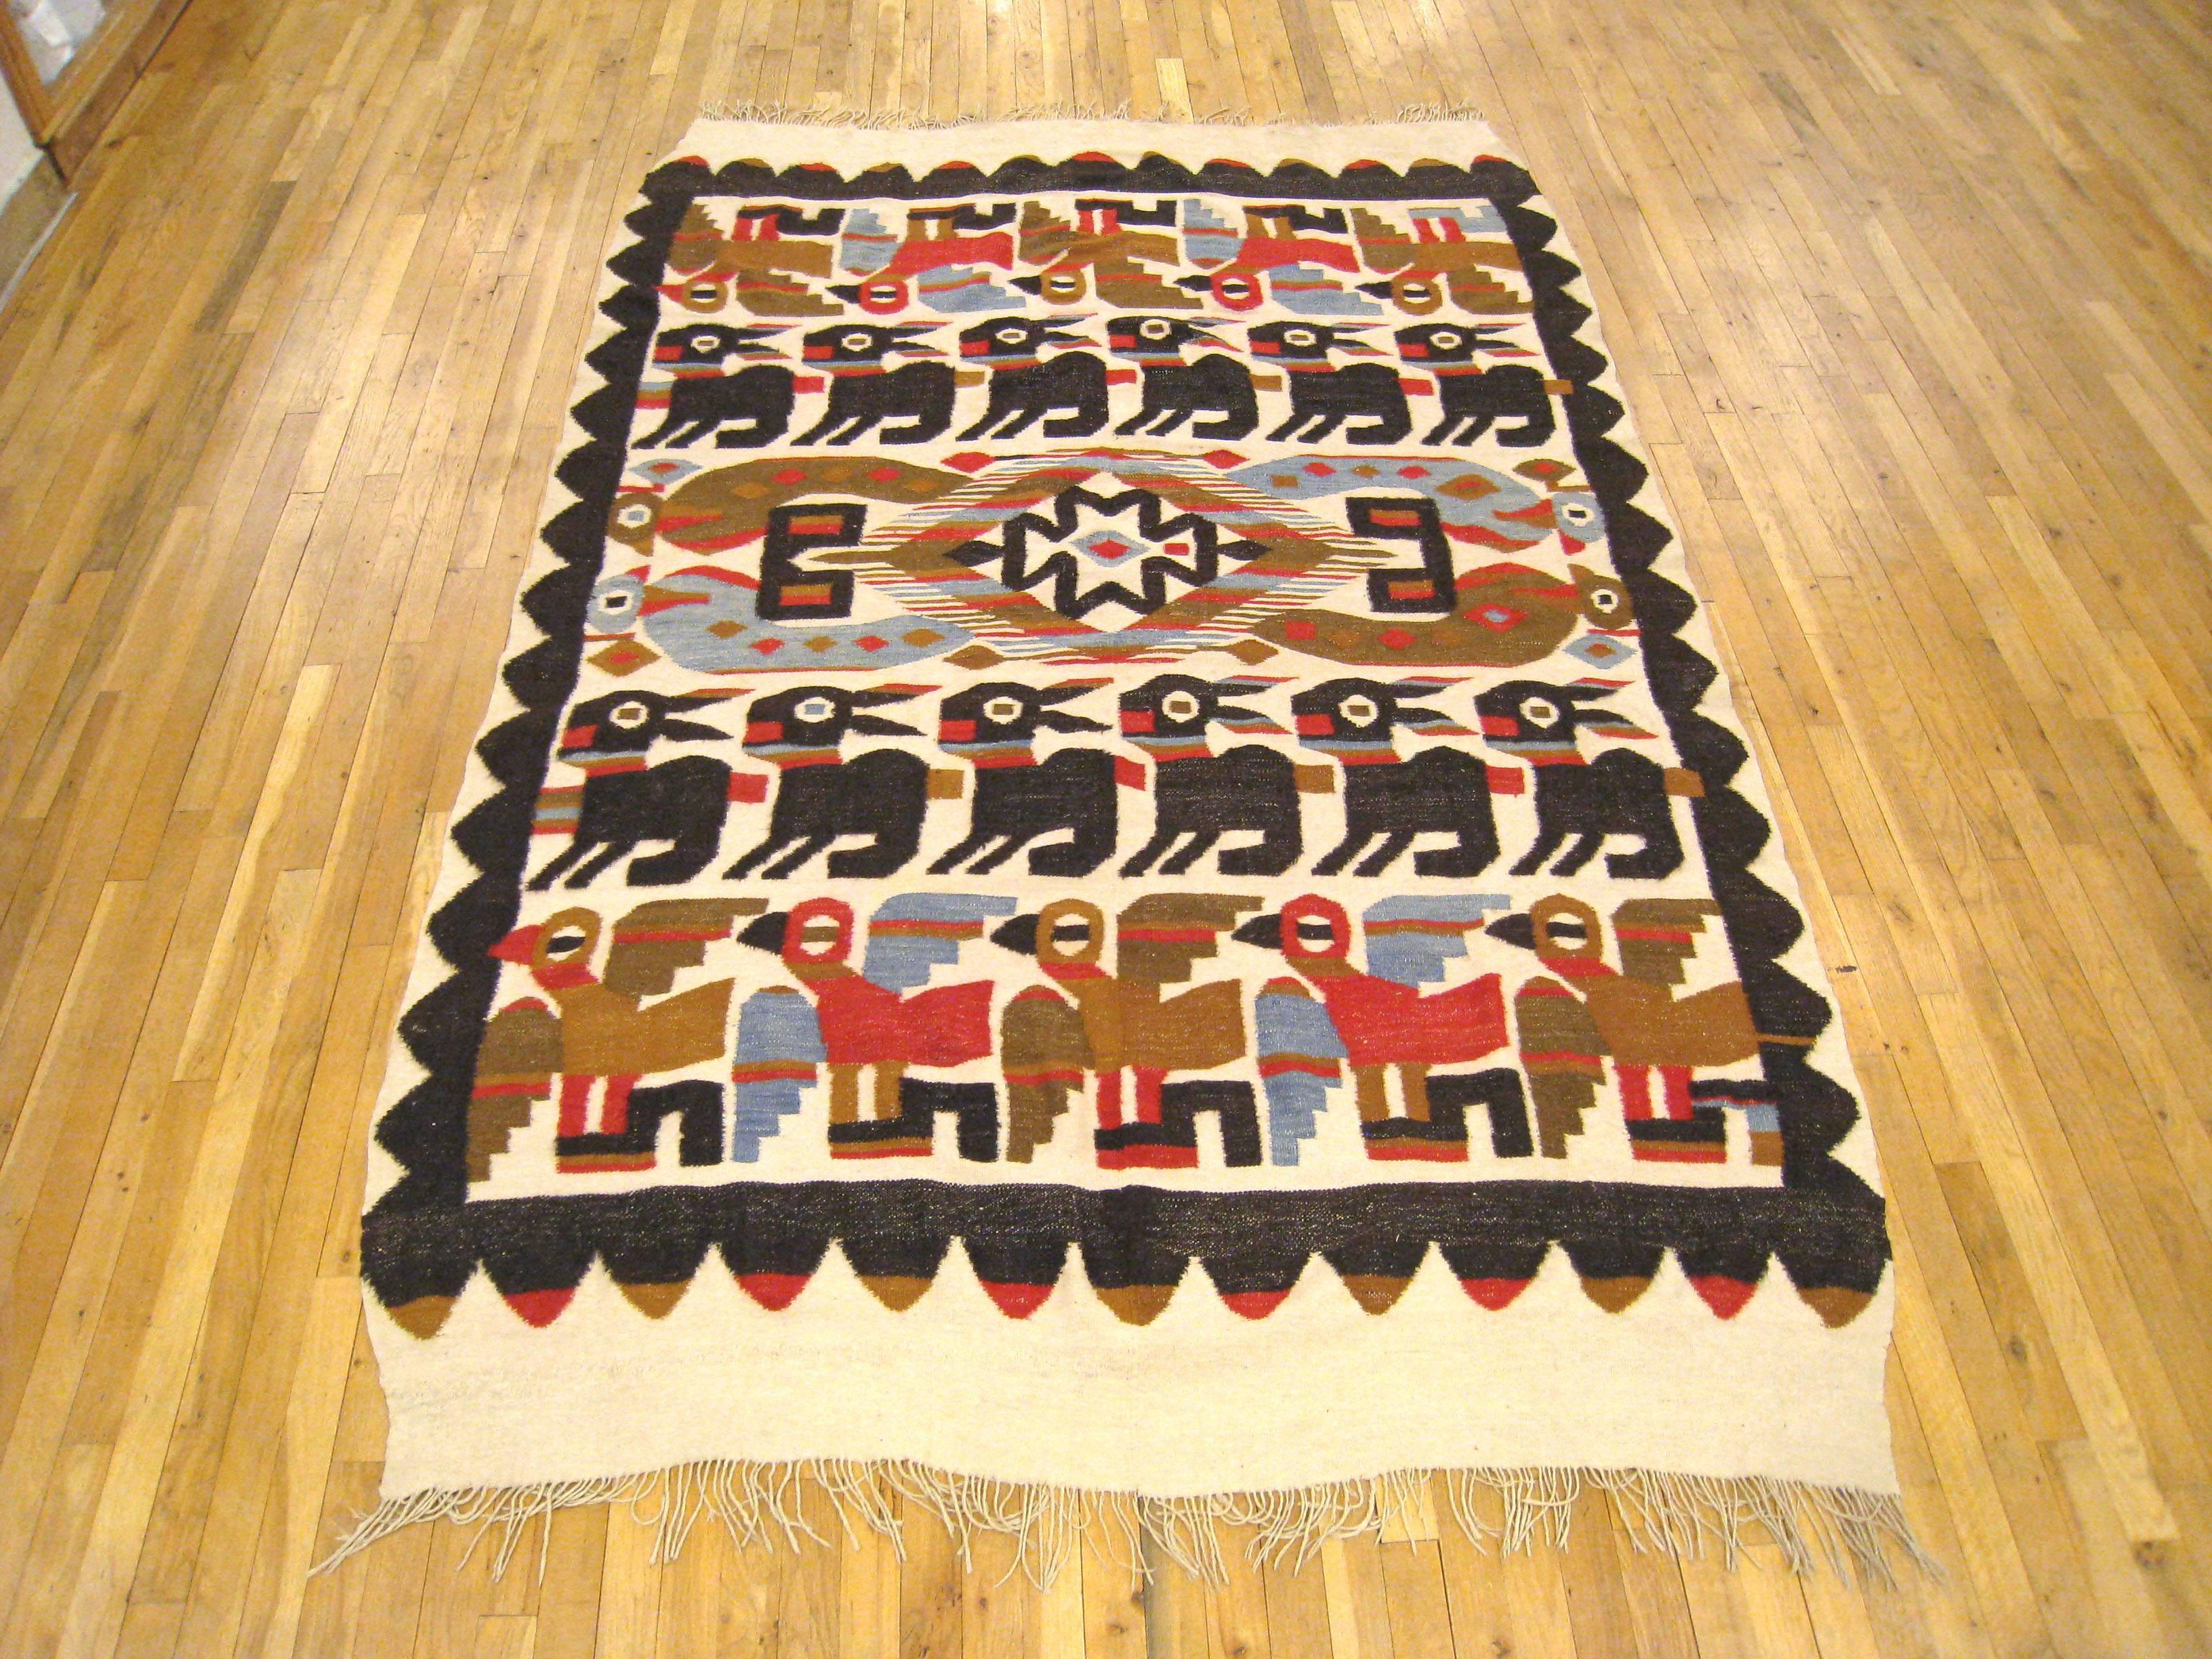 A vintage Peruvian flat-woven rug with a stylized 'Chancay' design, circa 1930. Size: 8'8 x 5'3. This lovely handwoven carpet features alternating rows of stylized bird and rabbit motifs. This is a flat woven rug, hand woven with wool, but with no